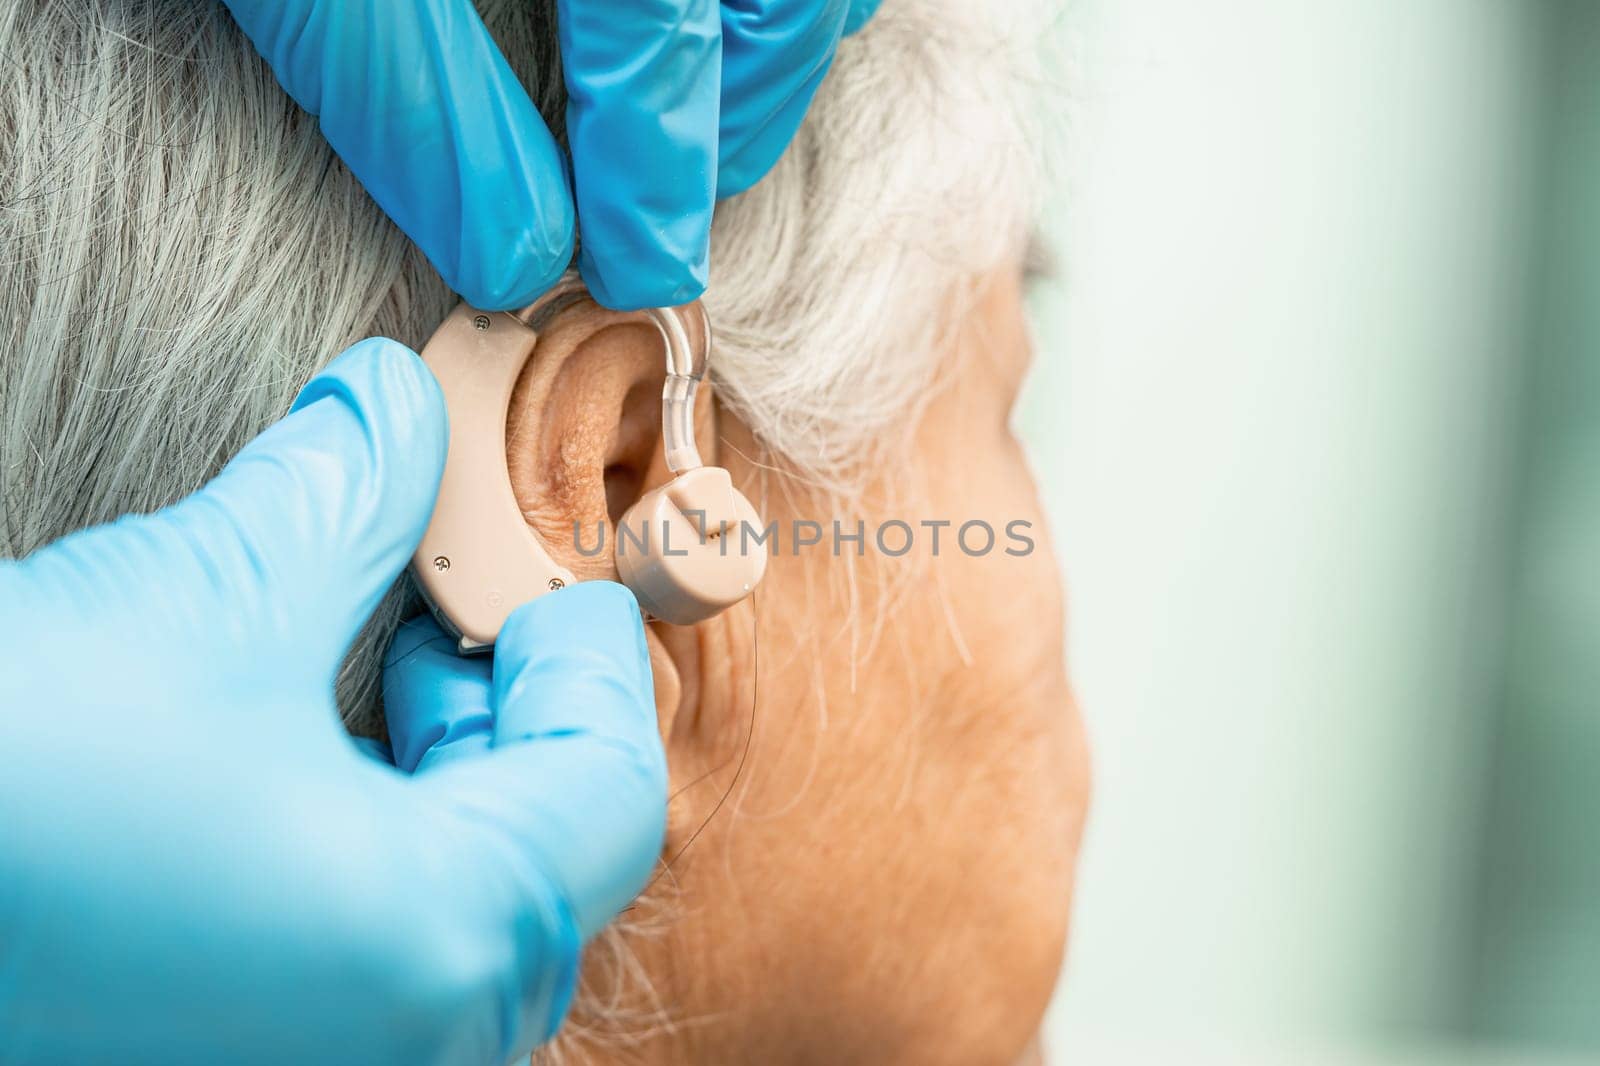 Asian senior woman patient wearing a hearing aid for treating hearing loss problem.